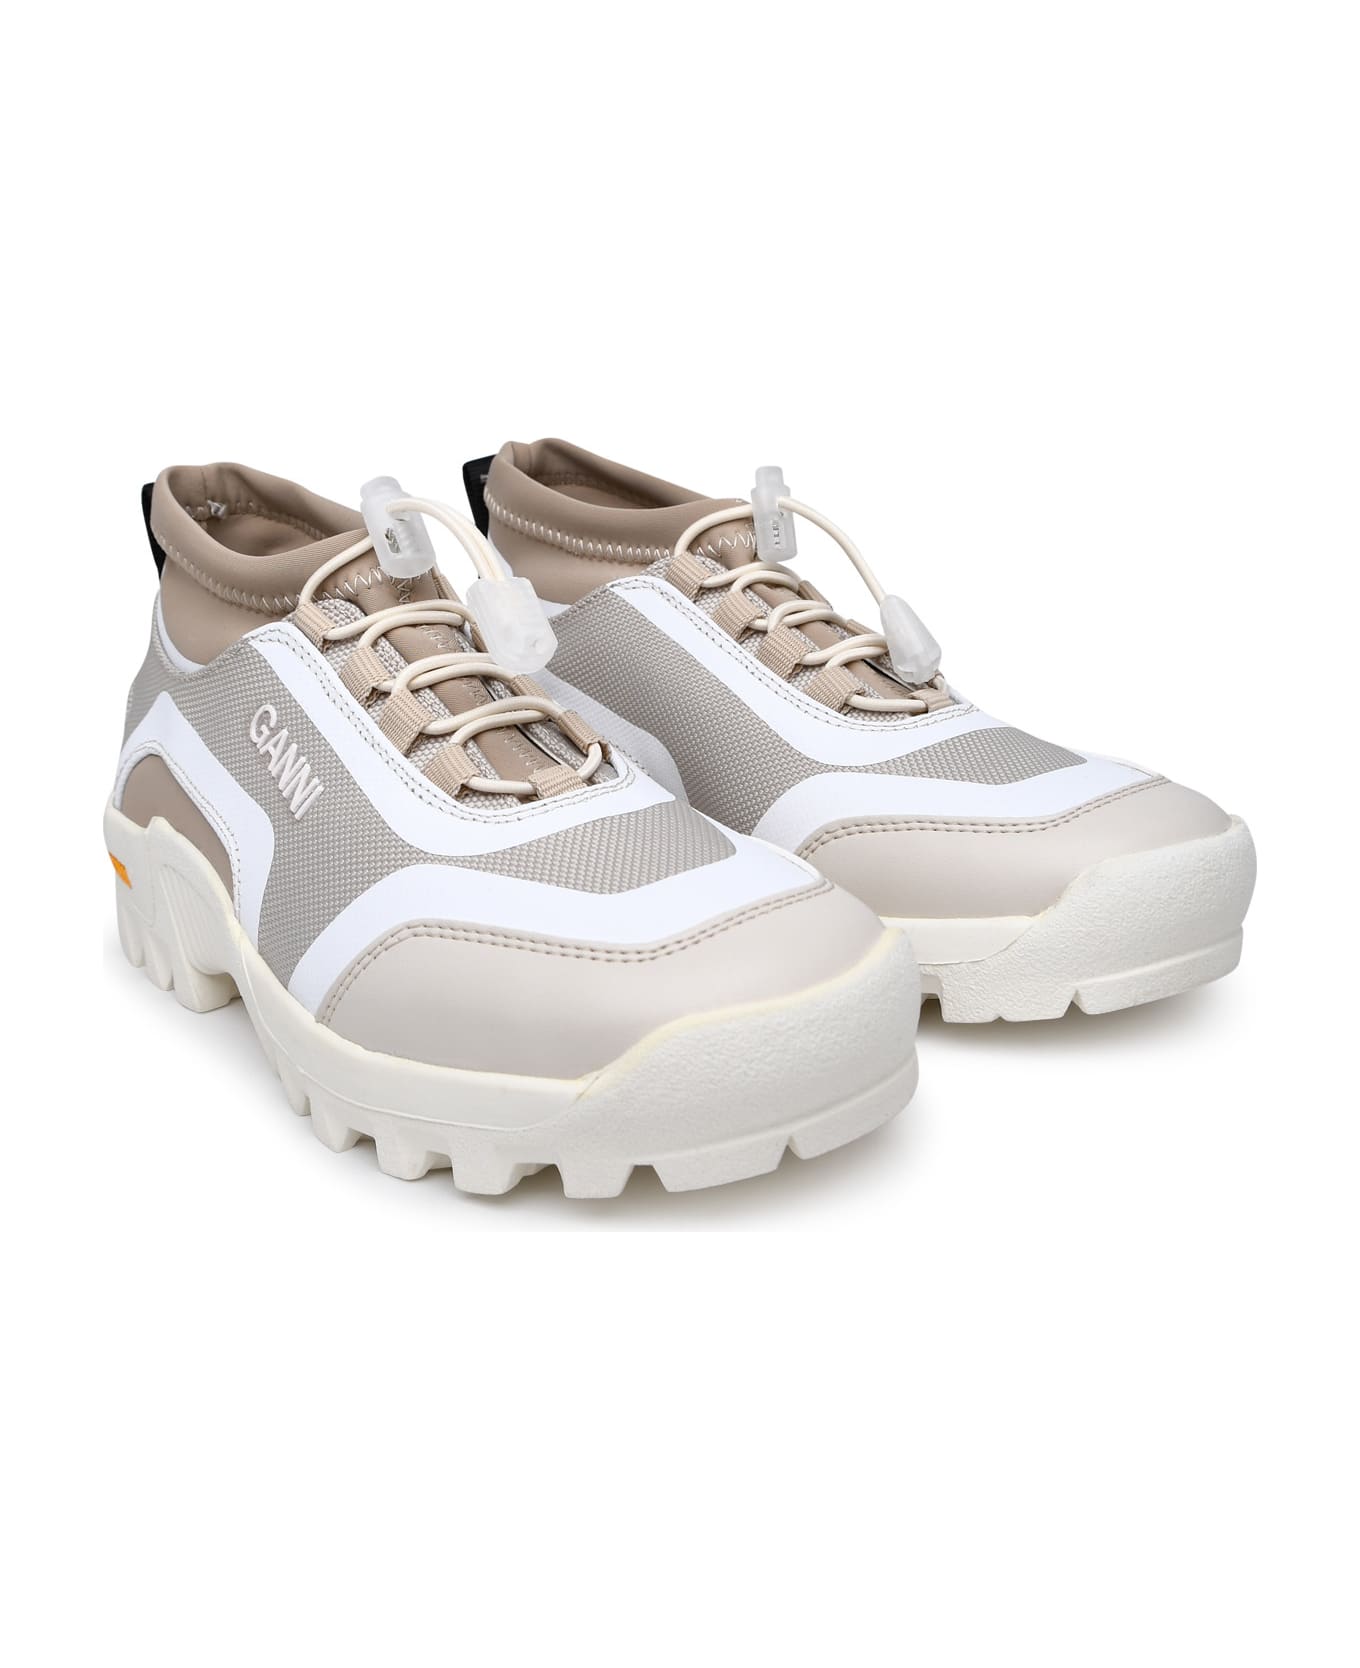 Ganni Performance Two-tone Recycled Polyester Sneakers - Egret